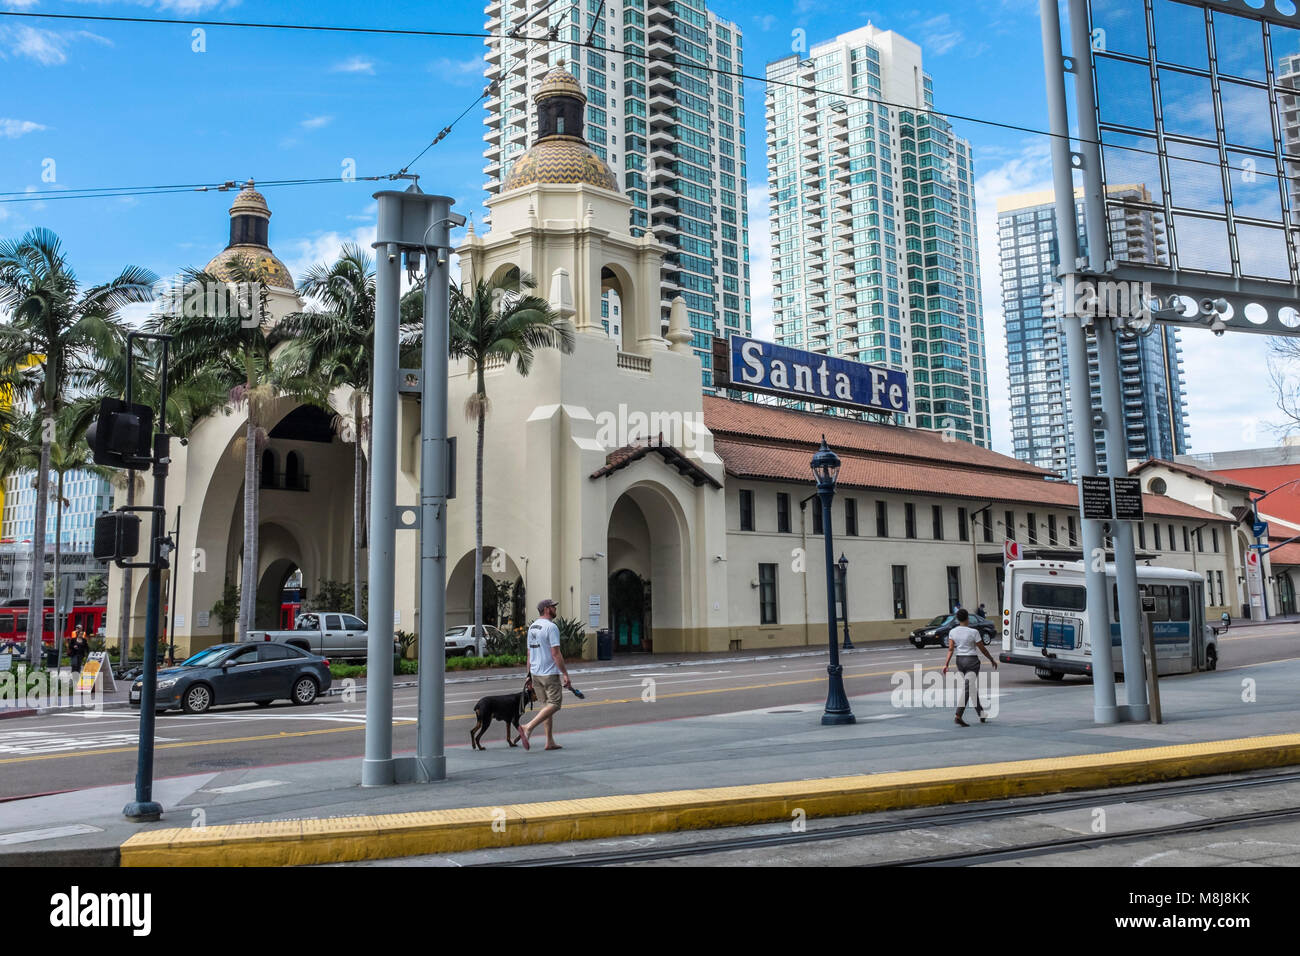 SAN DIEGO, CALIFORNIA, USA - Santa Fe Union Railway Station in the Downtown part of the city. Stock Photo